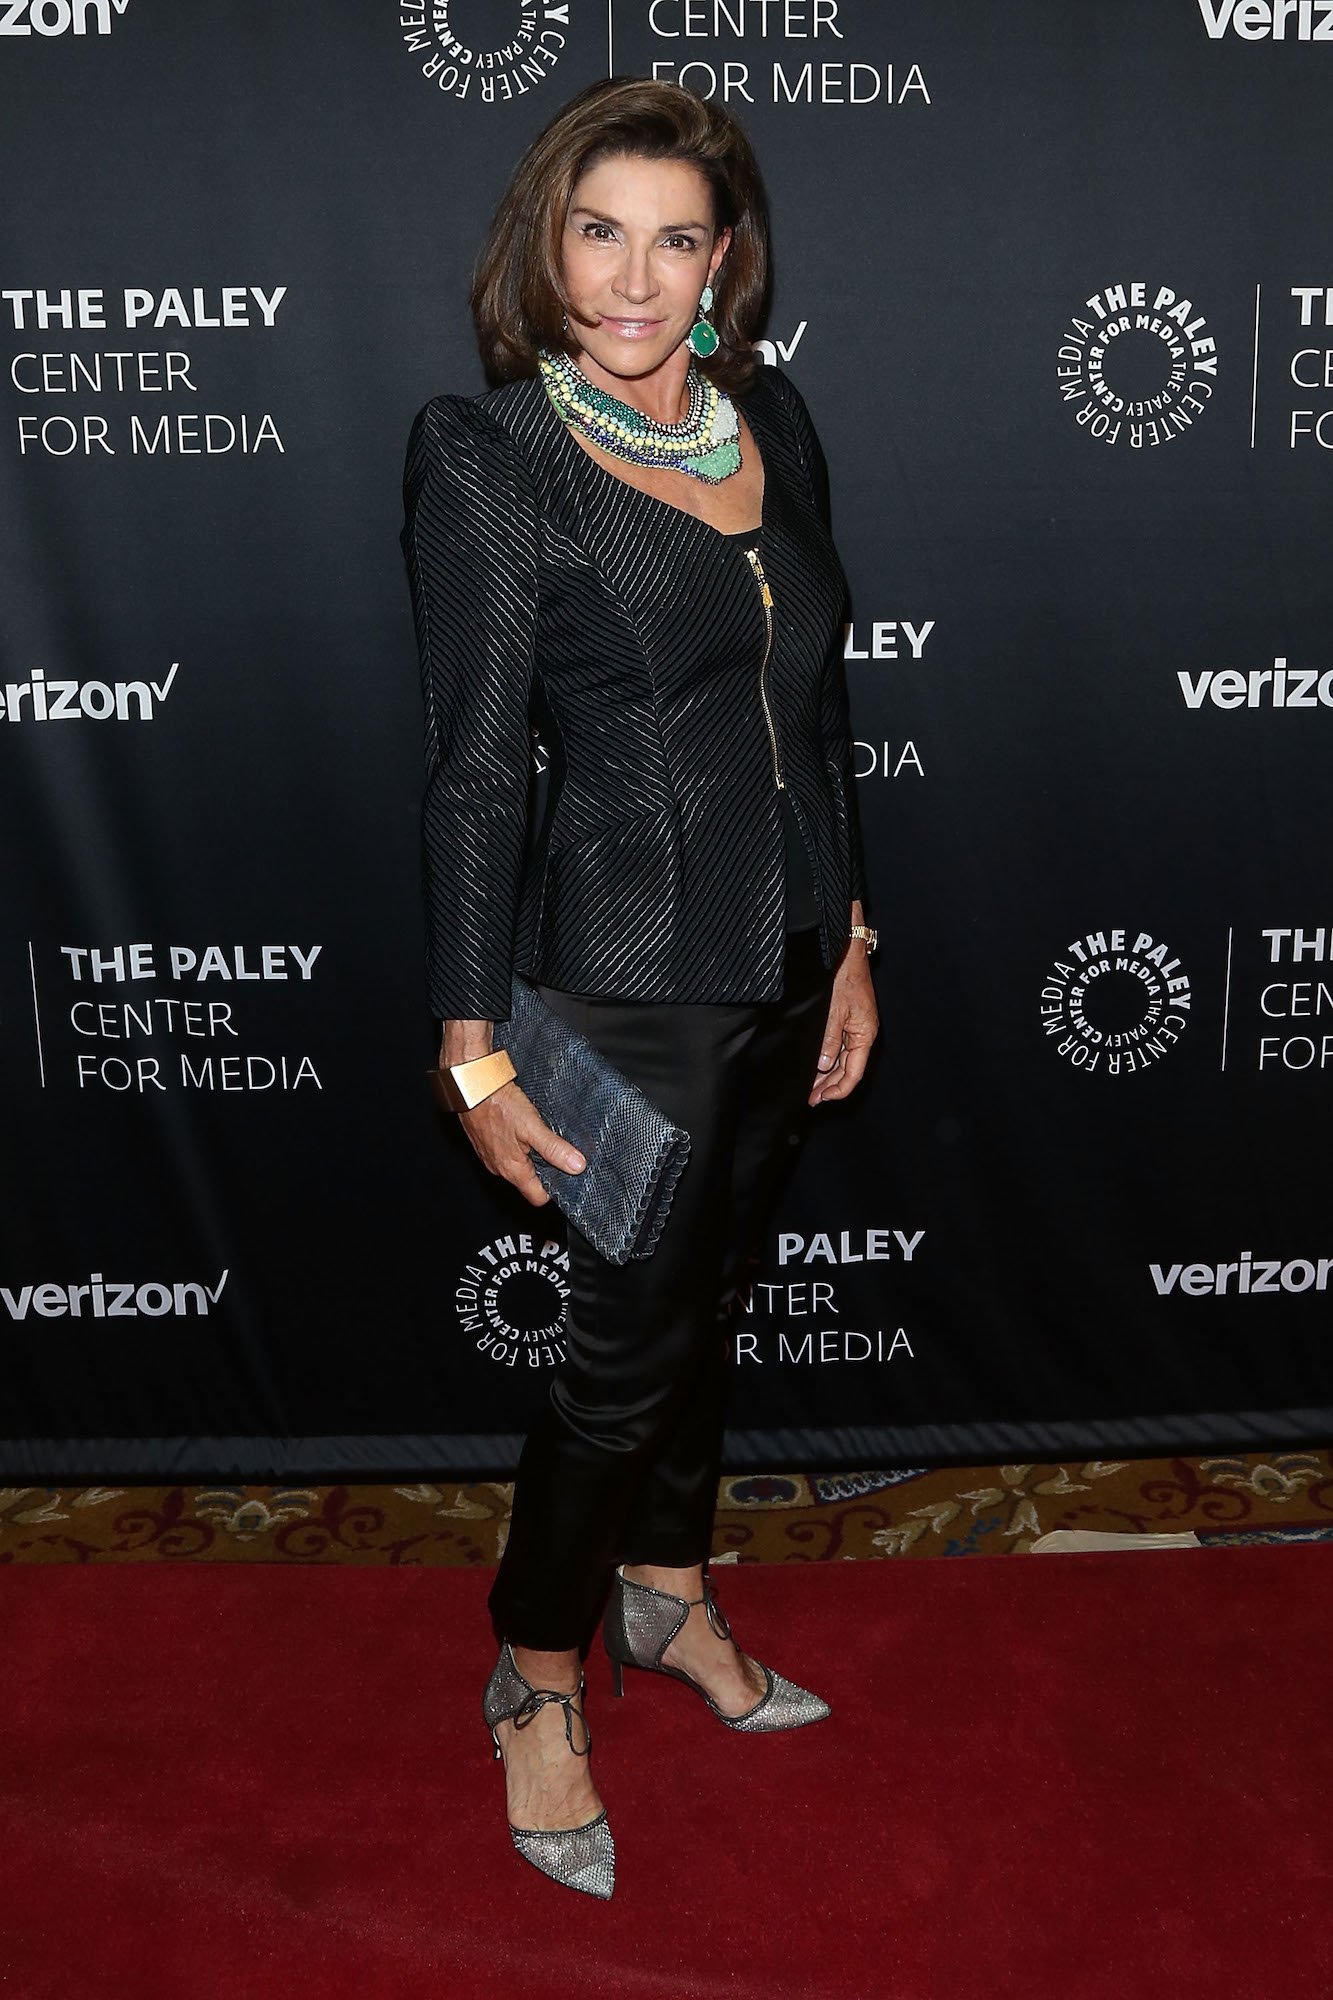 Hilary Farr smiling in front of a black background